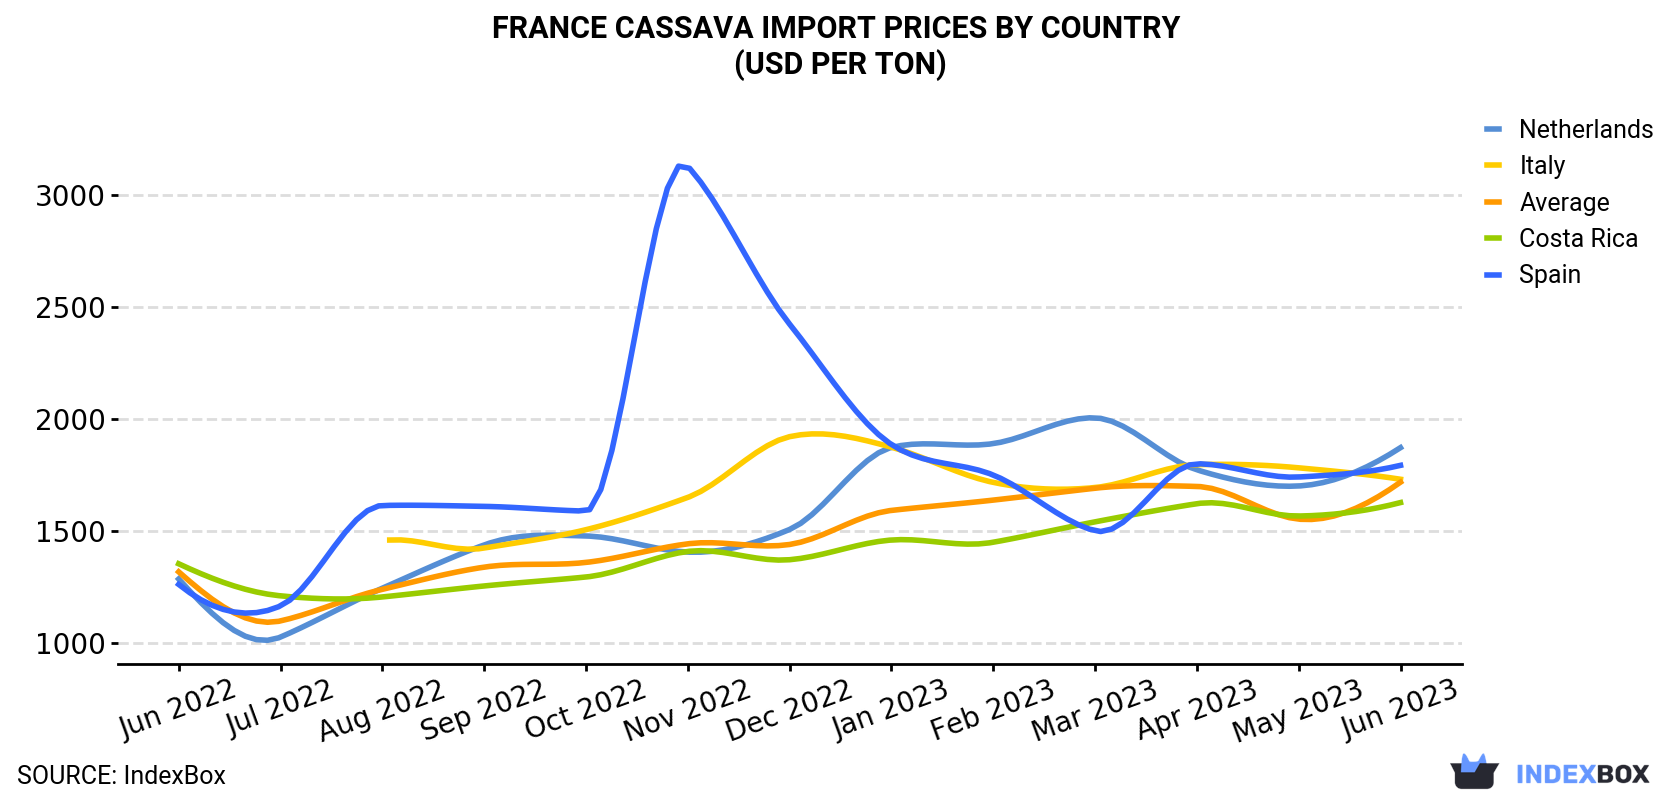 France Cassava Import Prices By Country (USD Per Ton)